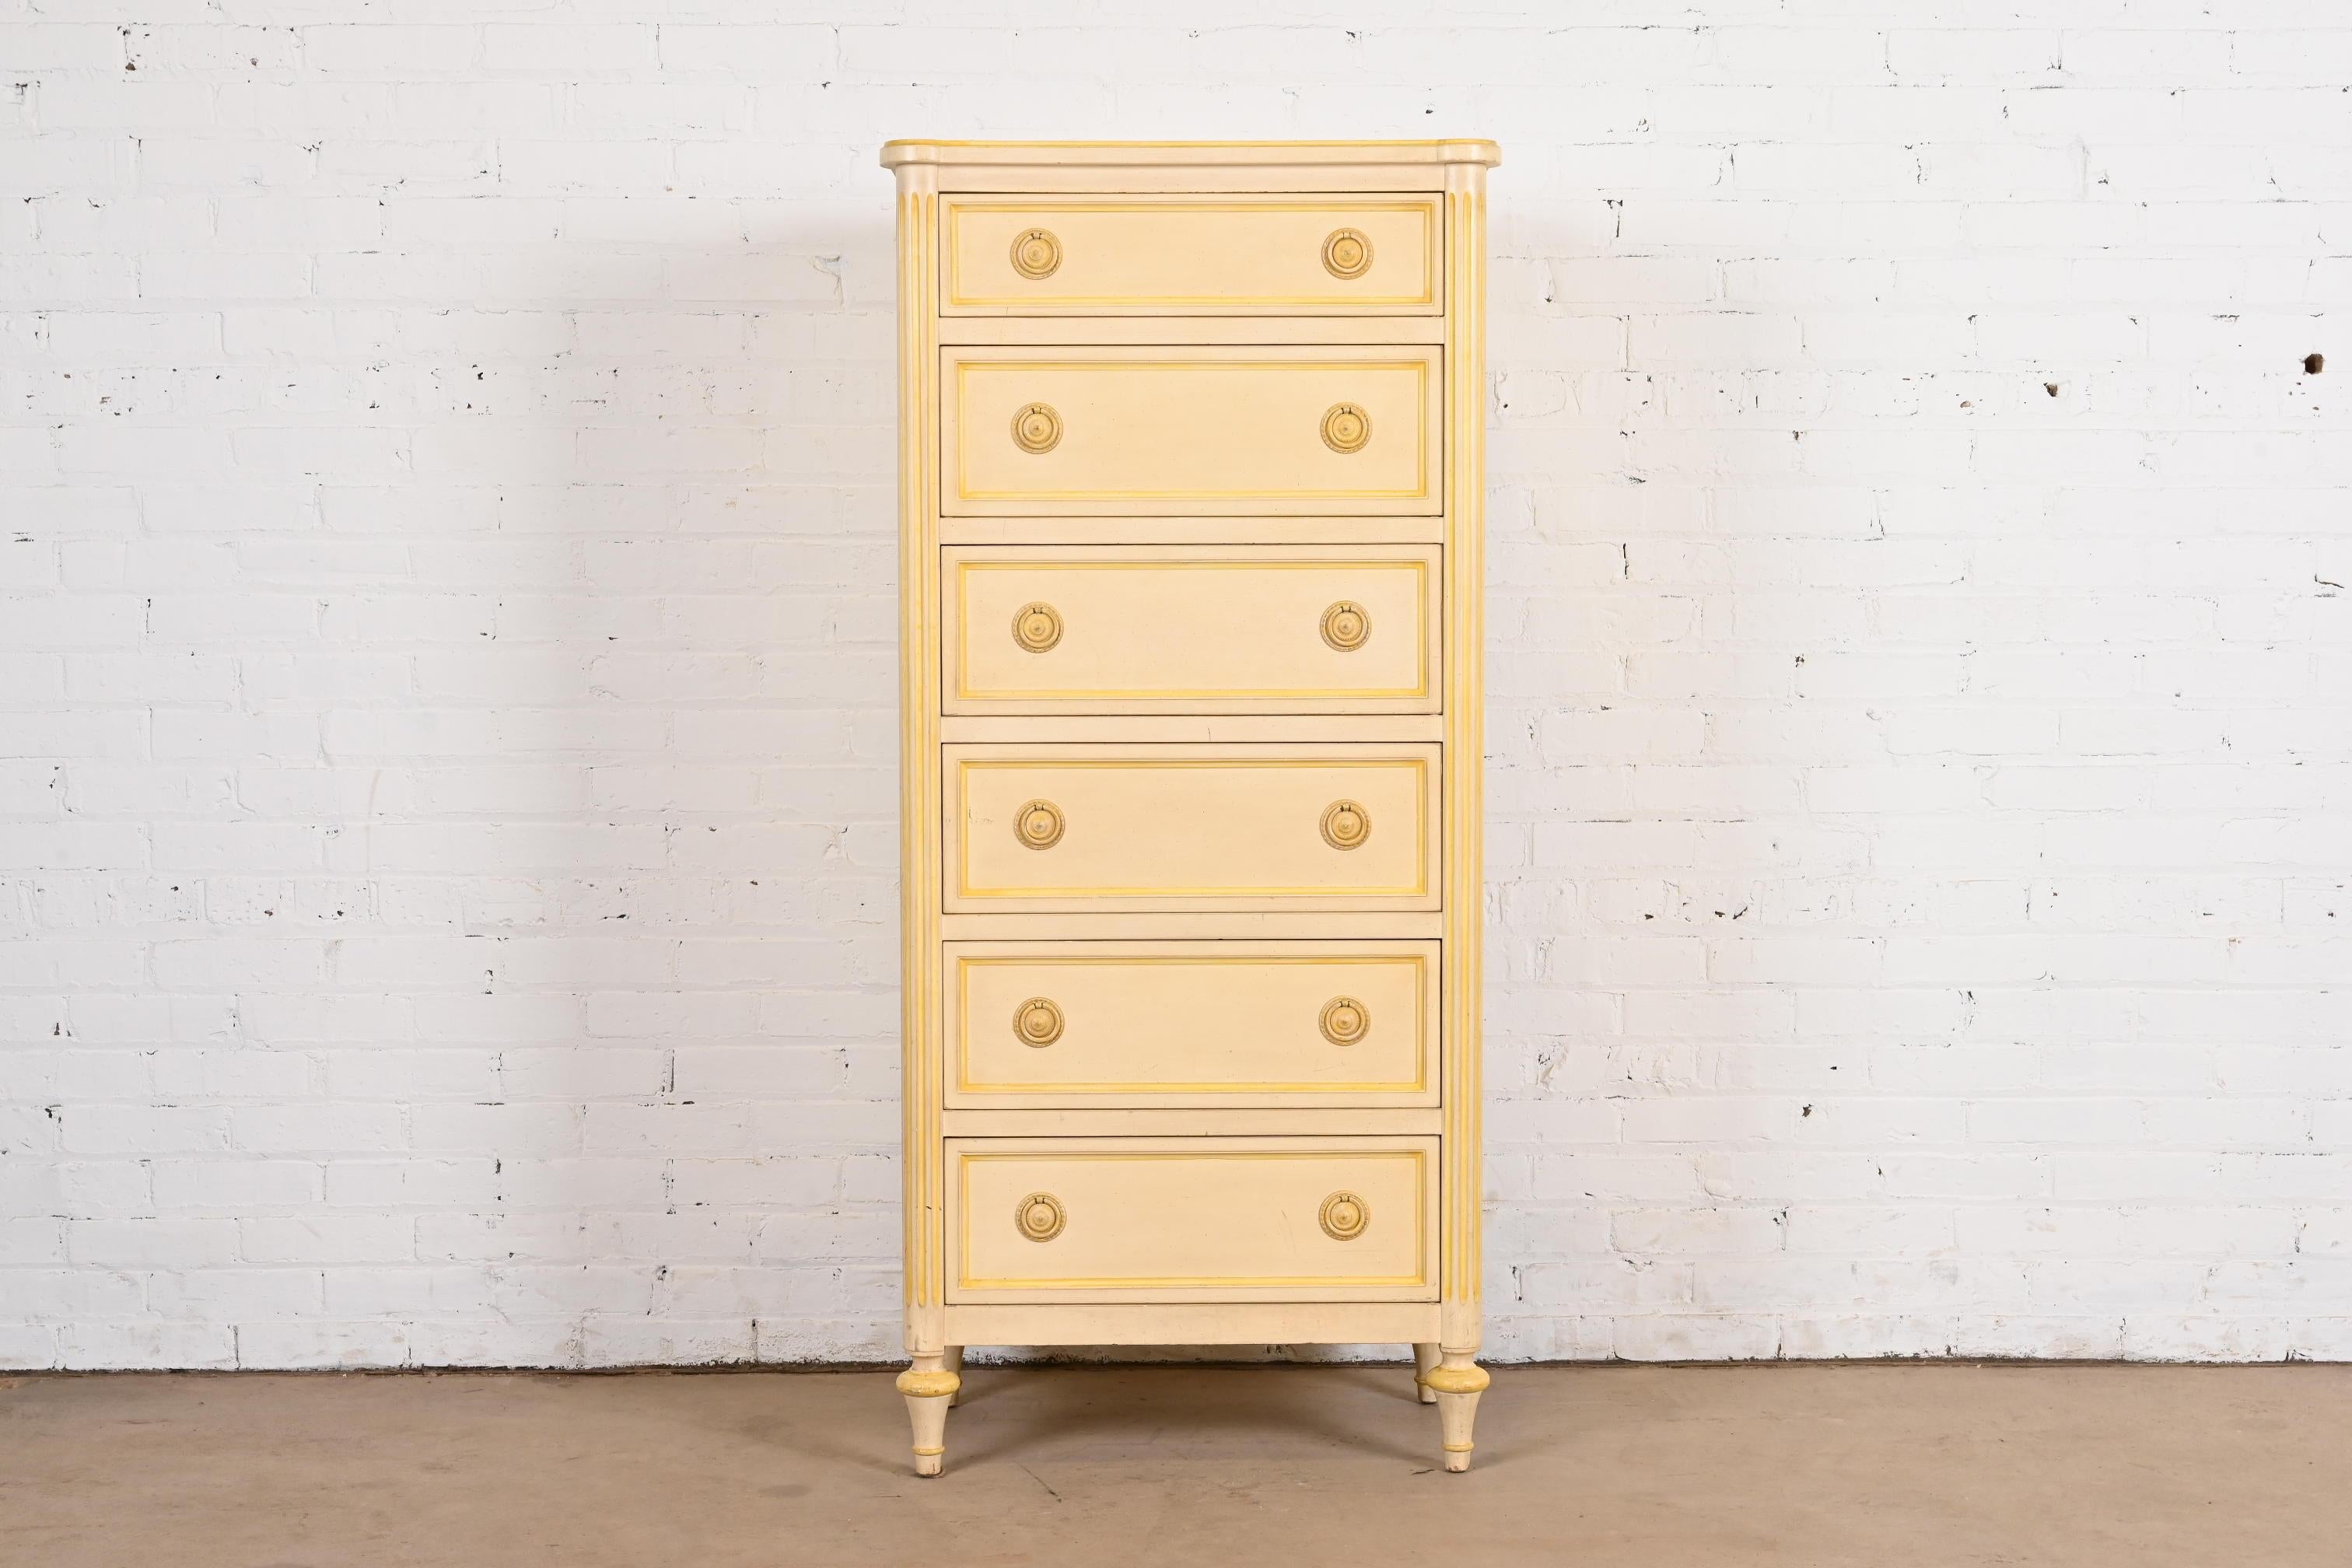 A gorgeous French Regency Louis XVI style six-drawer semainier or lingerie chest

By Jacques Bodart

USA, Circa 1960s

Cream painted carved walnut, with yellow painted trim, and original painted brass hardware.

Measures: 26.25